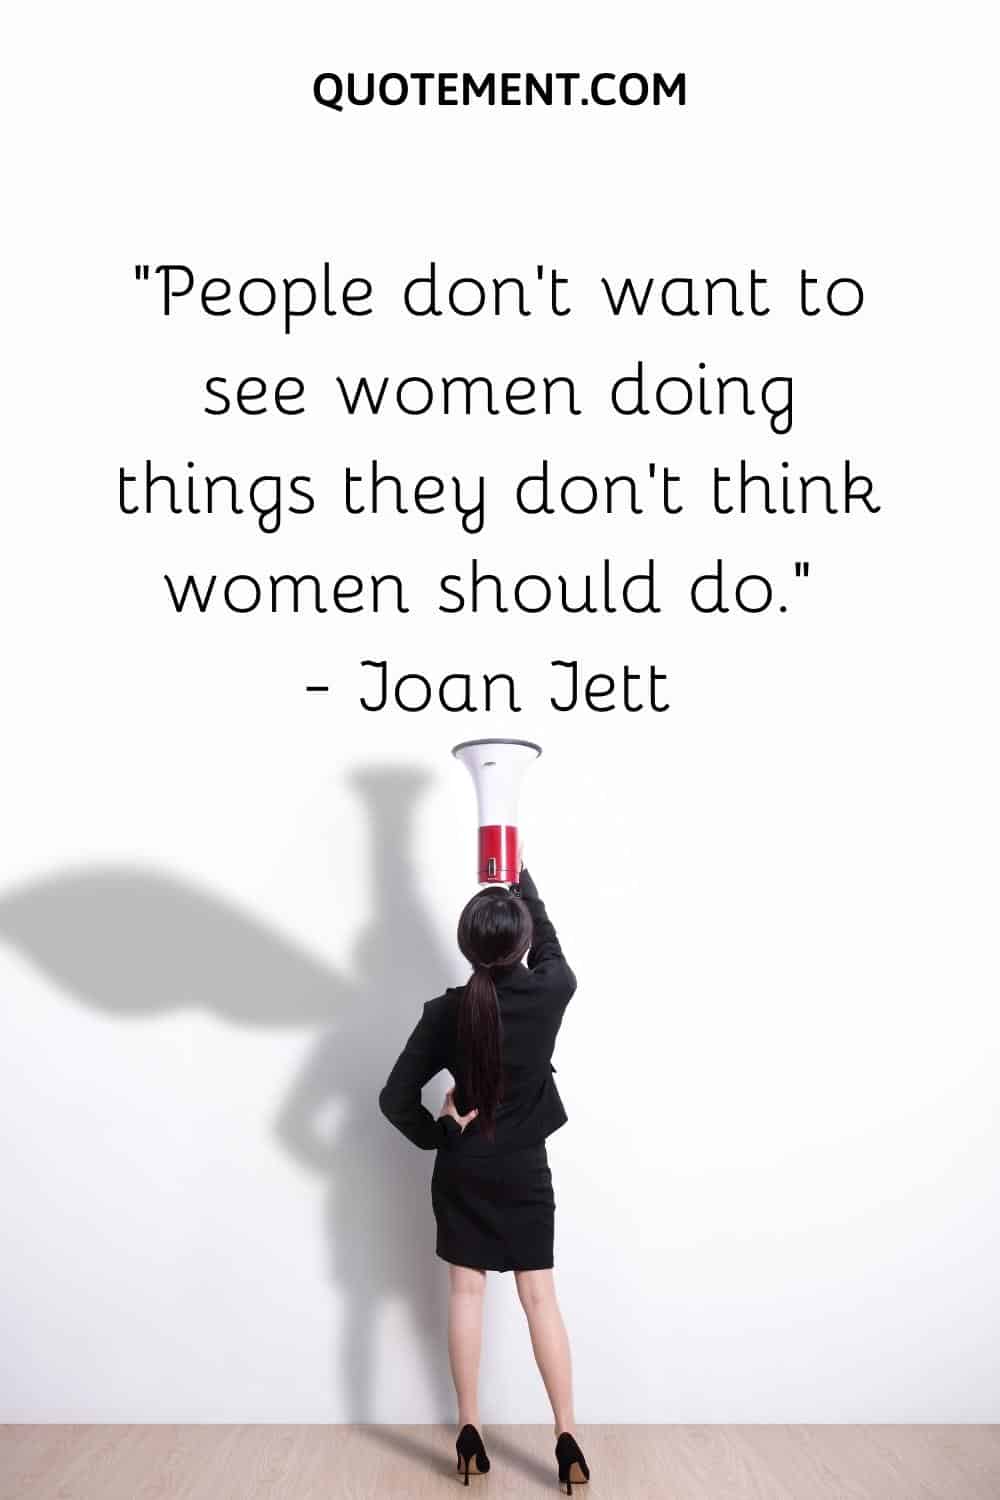 People don’t want to see women doing things they don’t think women should do